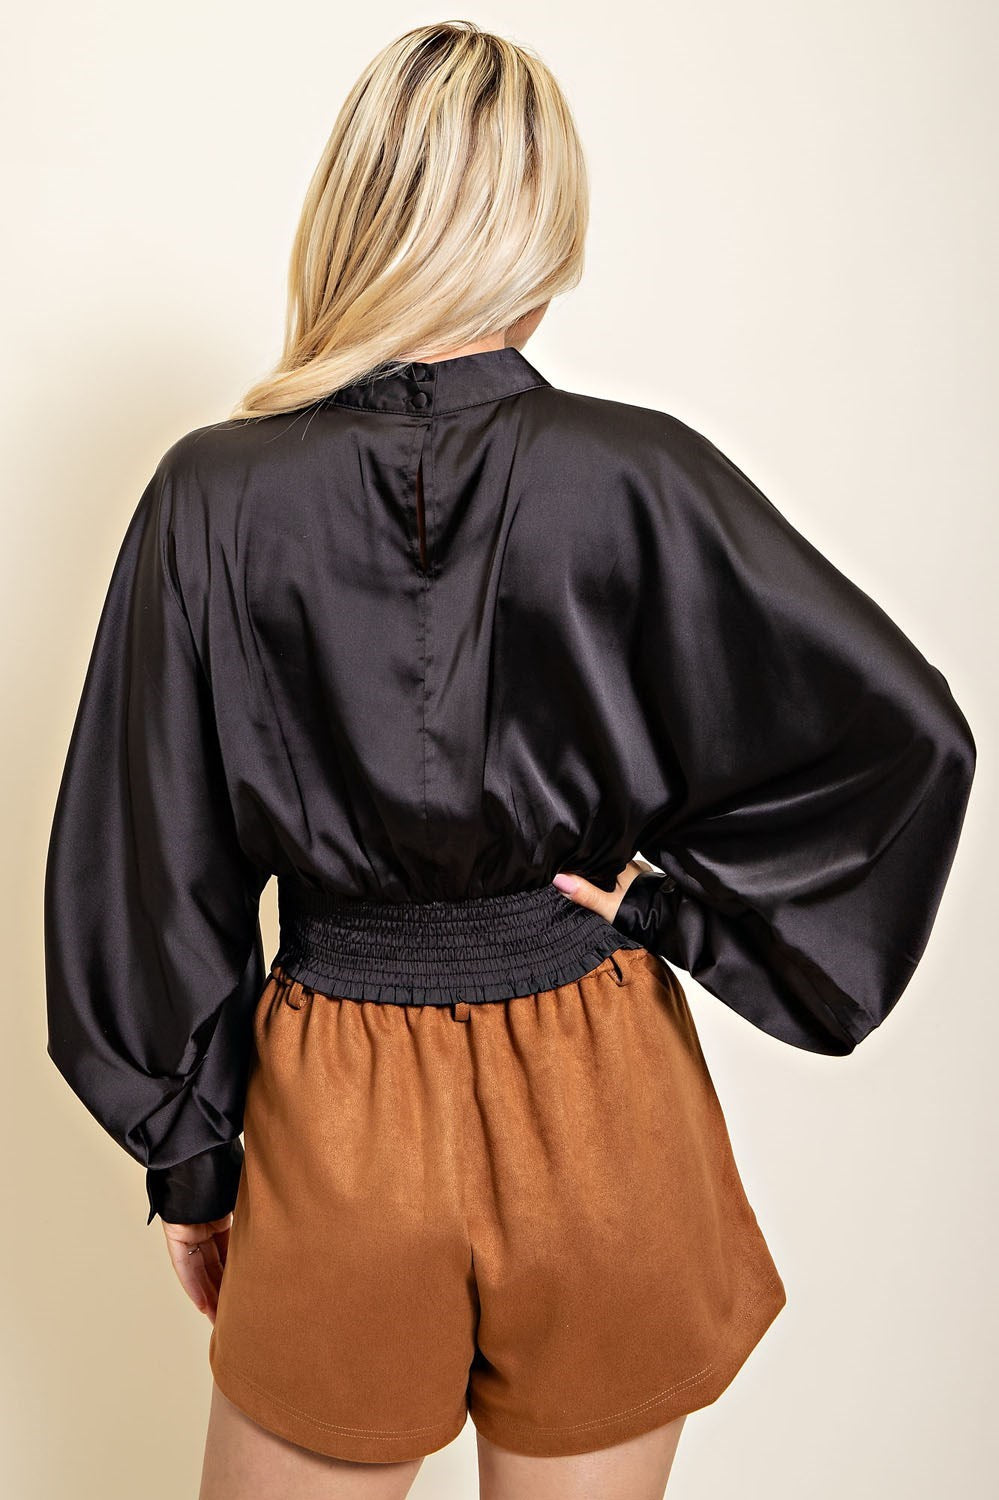 Black High Collar Balloon Sleeve Top with Button Closure in the Back.